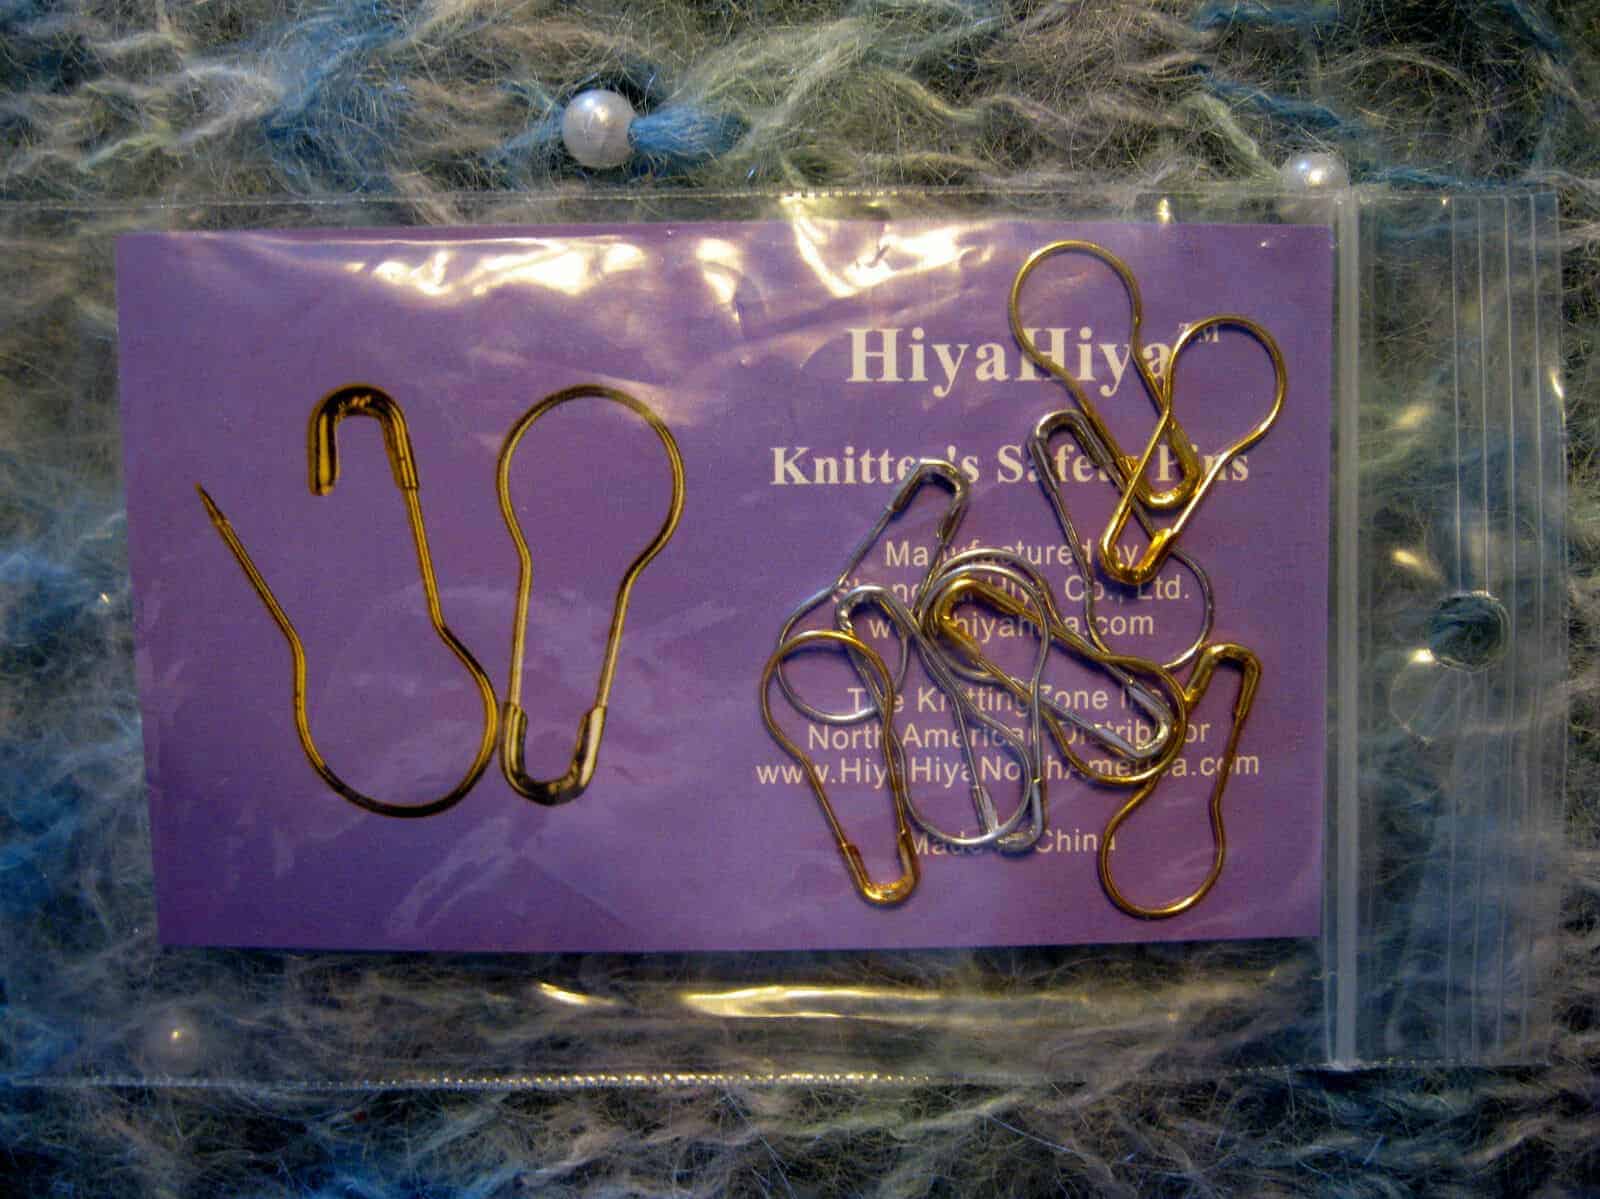 HiyaHiya Coilless Safety Pins for Knitters and Crocheters